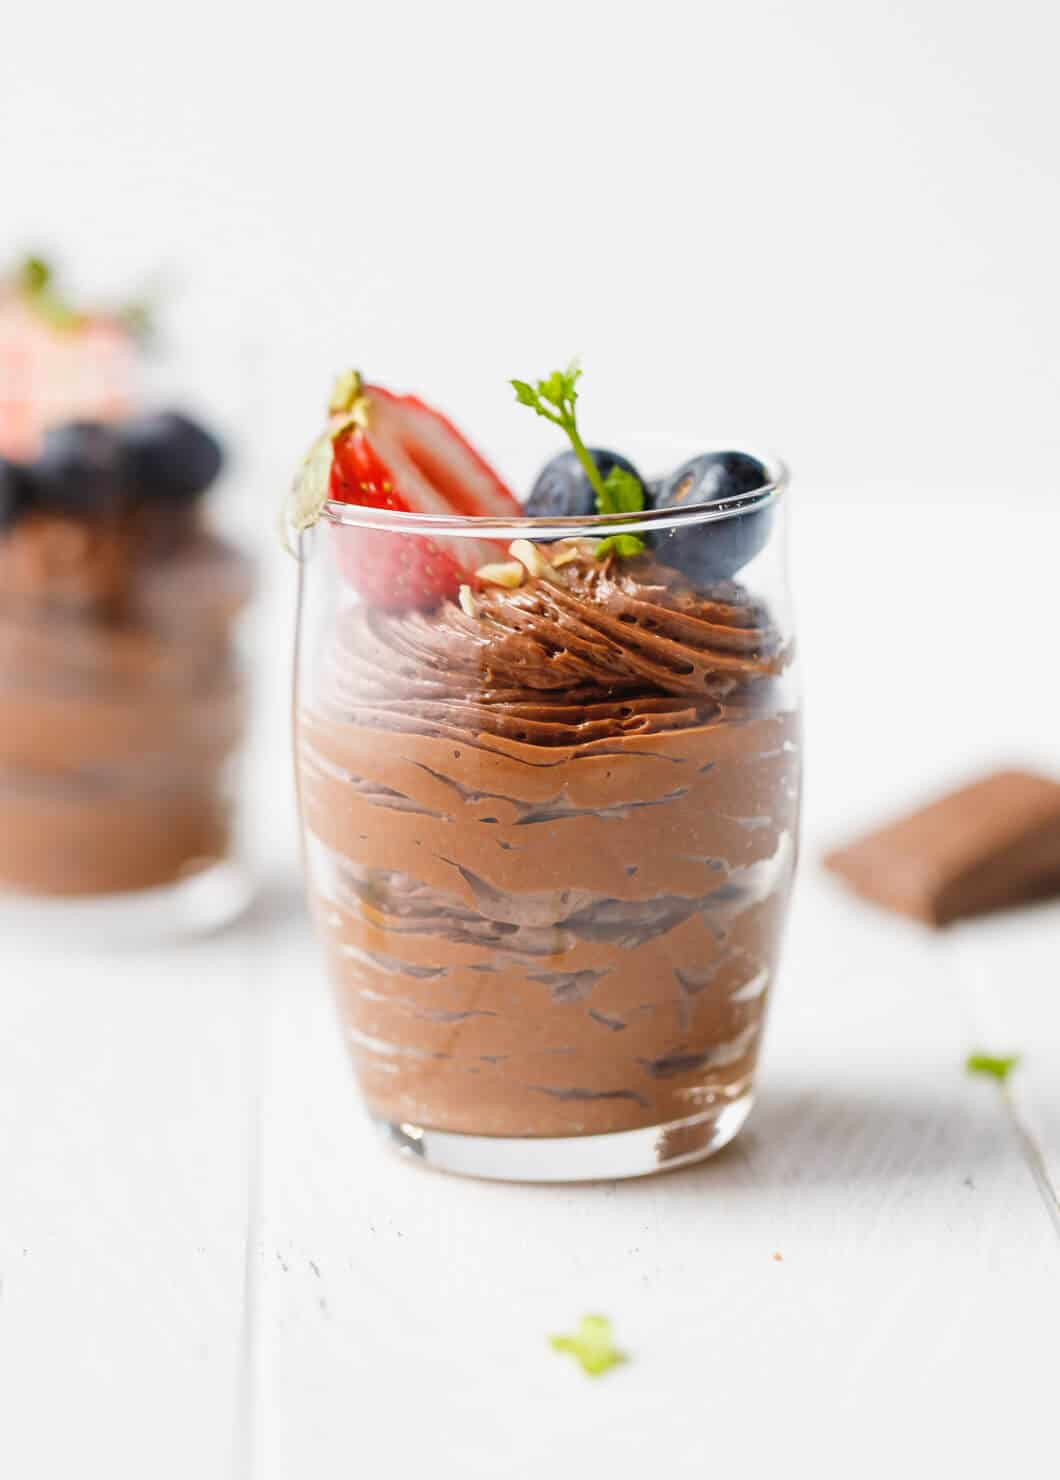 Low Calorie Chocolate Mousse
 Low Carb Keto Sugar Free Chocolate Mousse Recipe